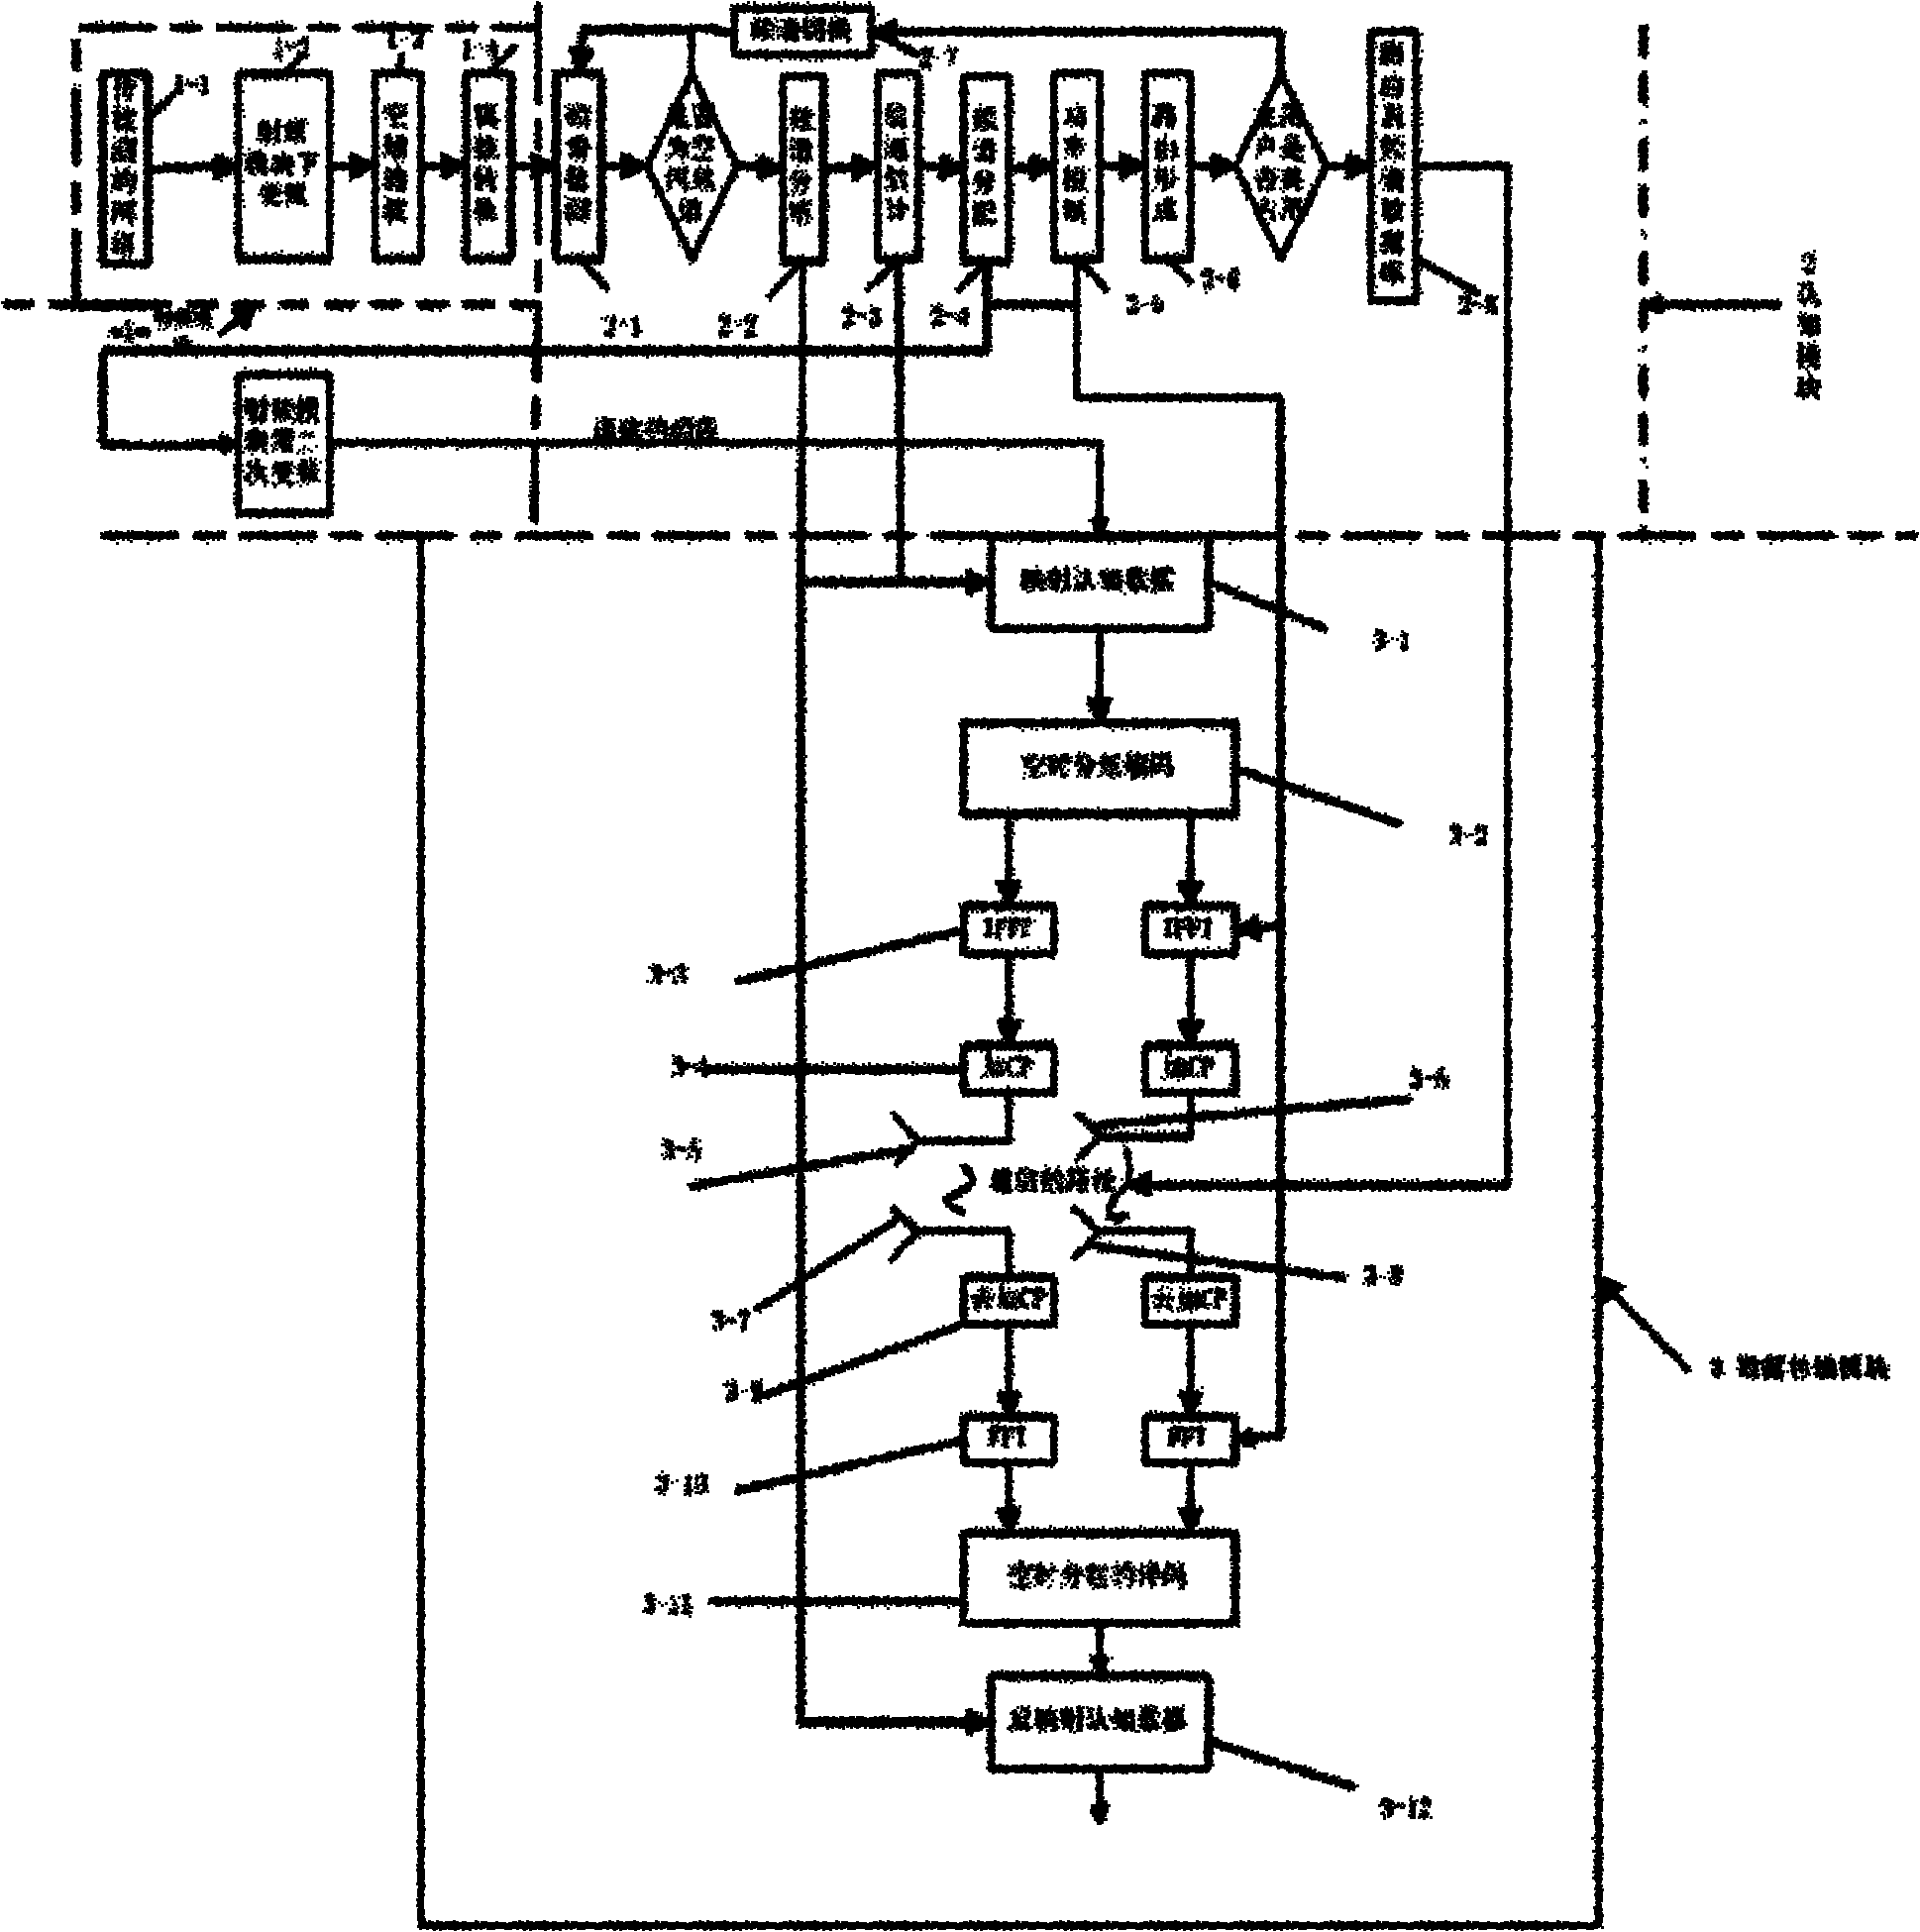 Multiple-input multiple-output (MIMO)-orthogonal frequency division multiplexing (OFDM) cognitive radio communication method